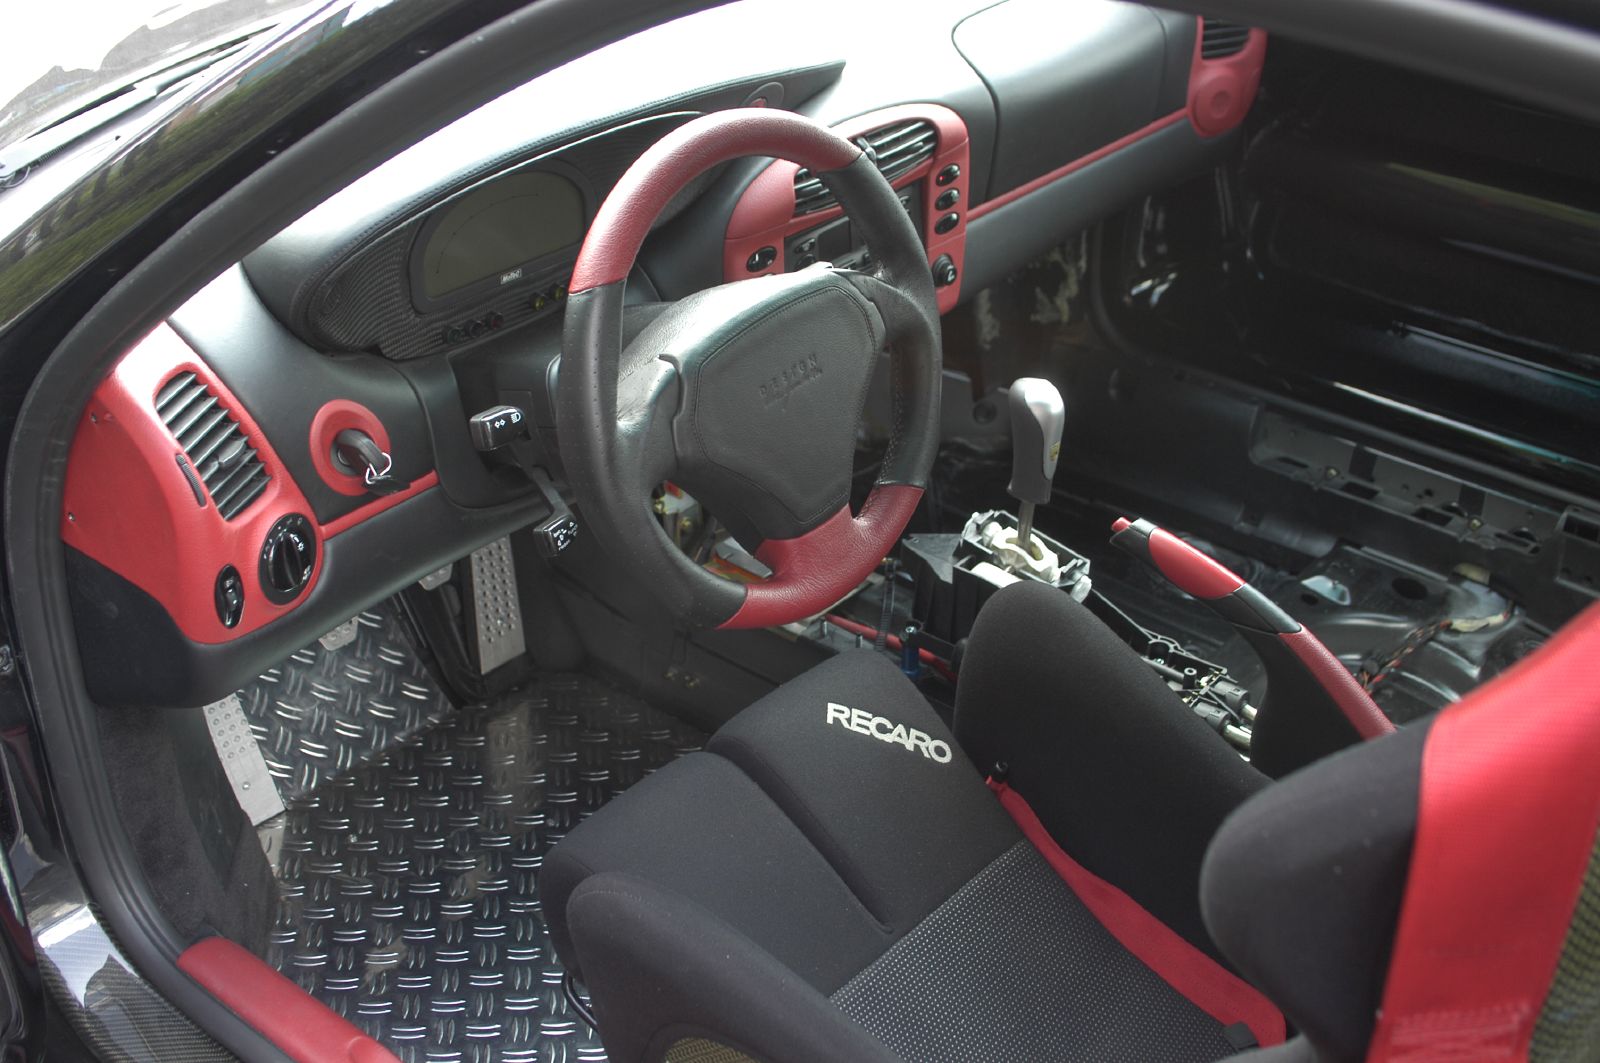 a close up of the inside of a car